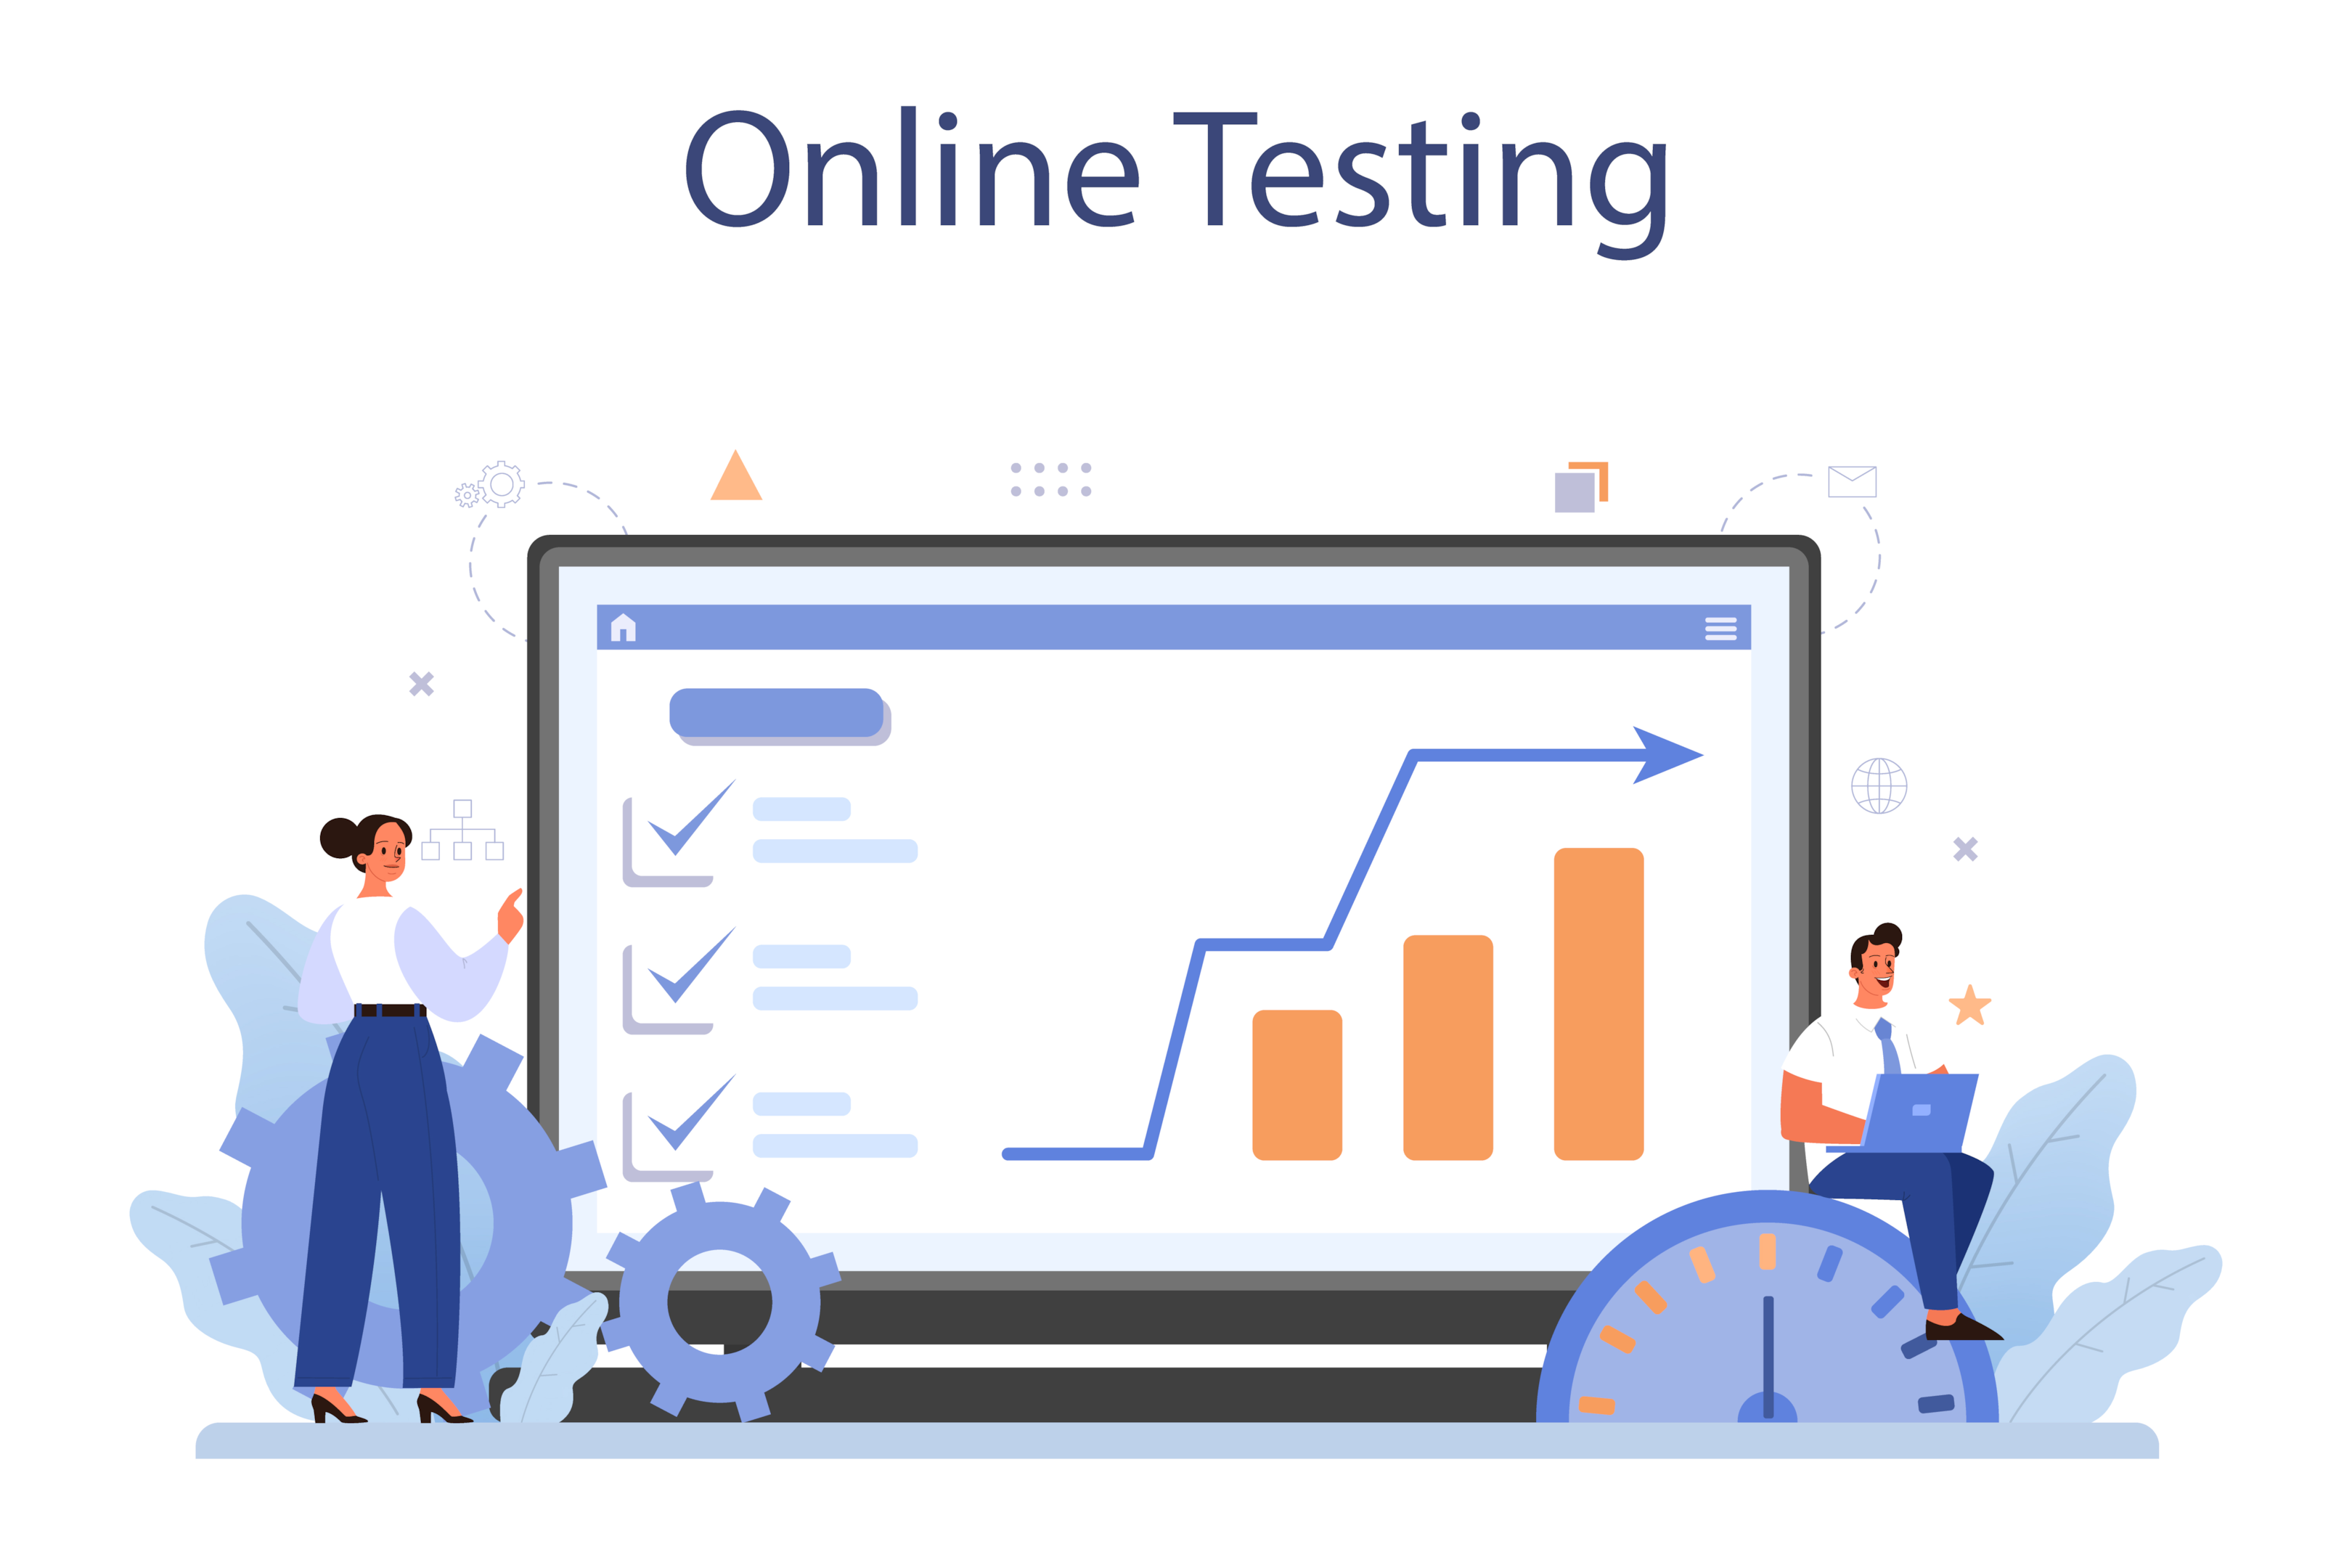 usability testing, customer support feedback, multivariate tests require